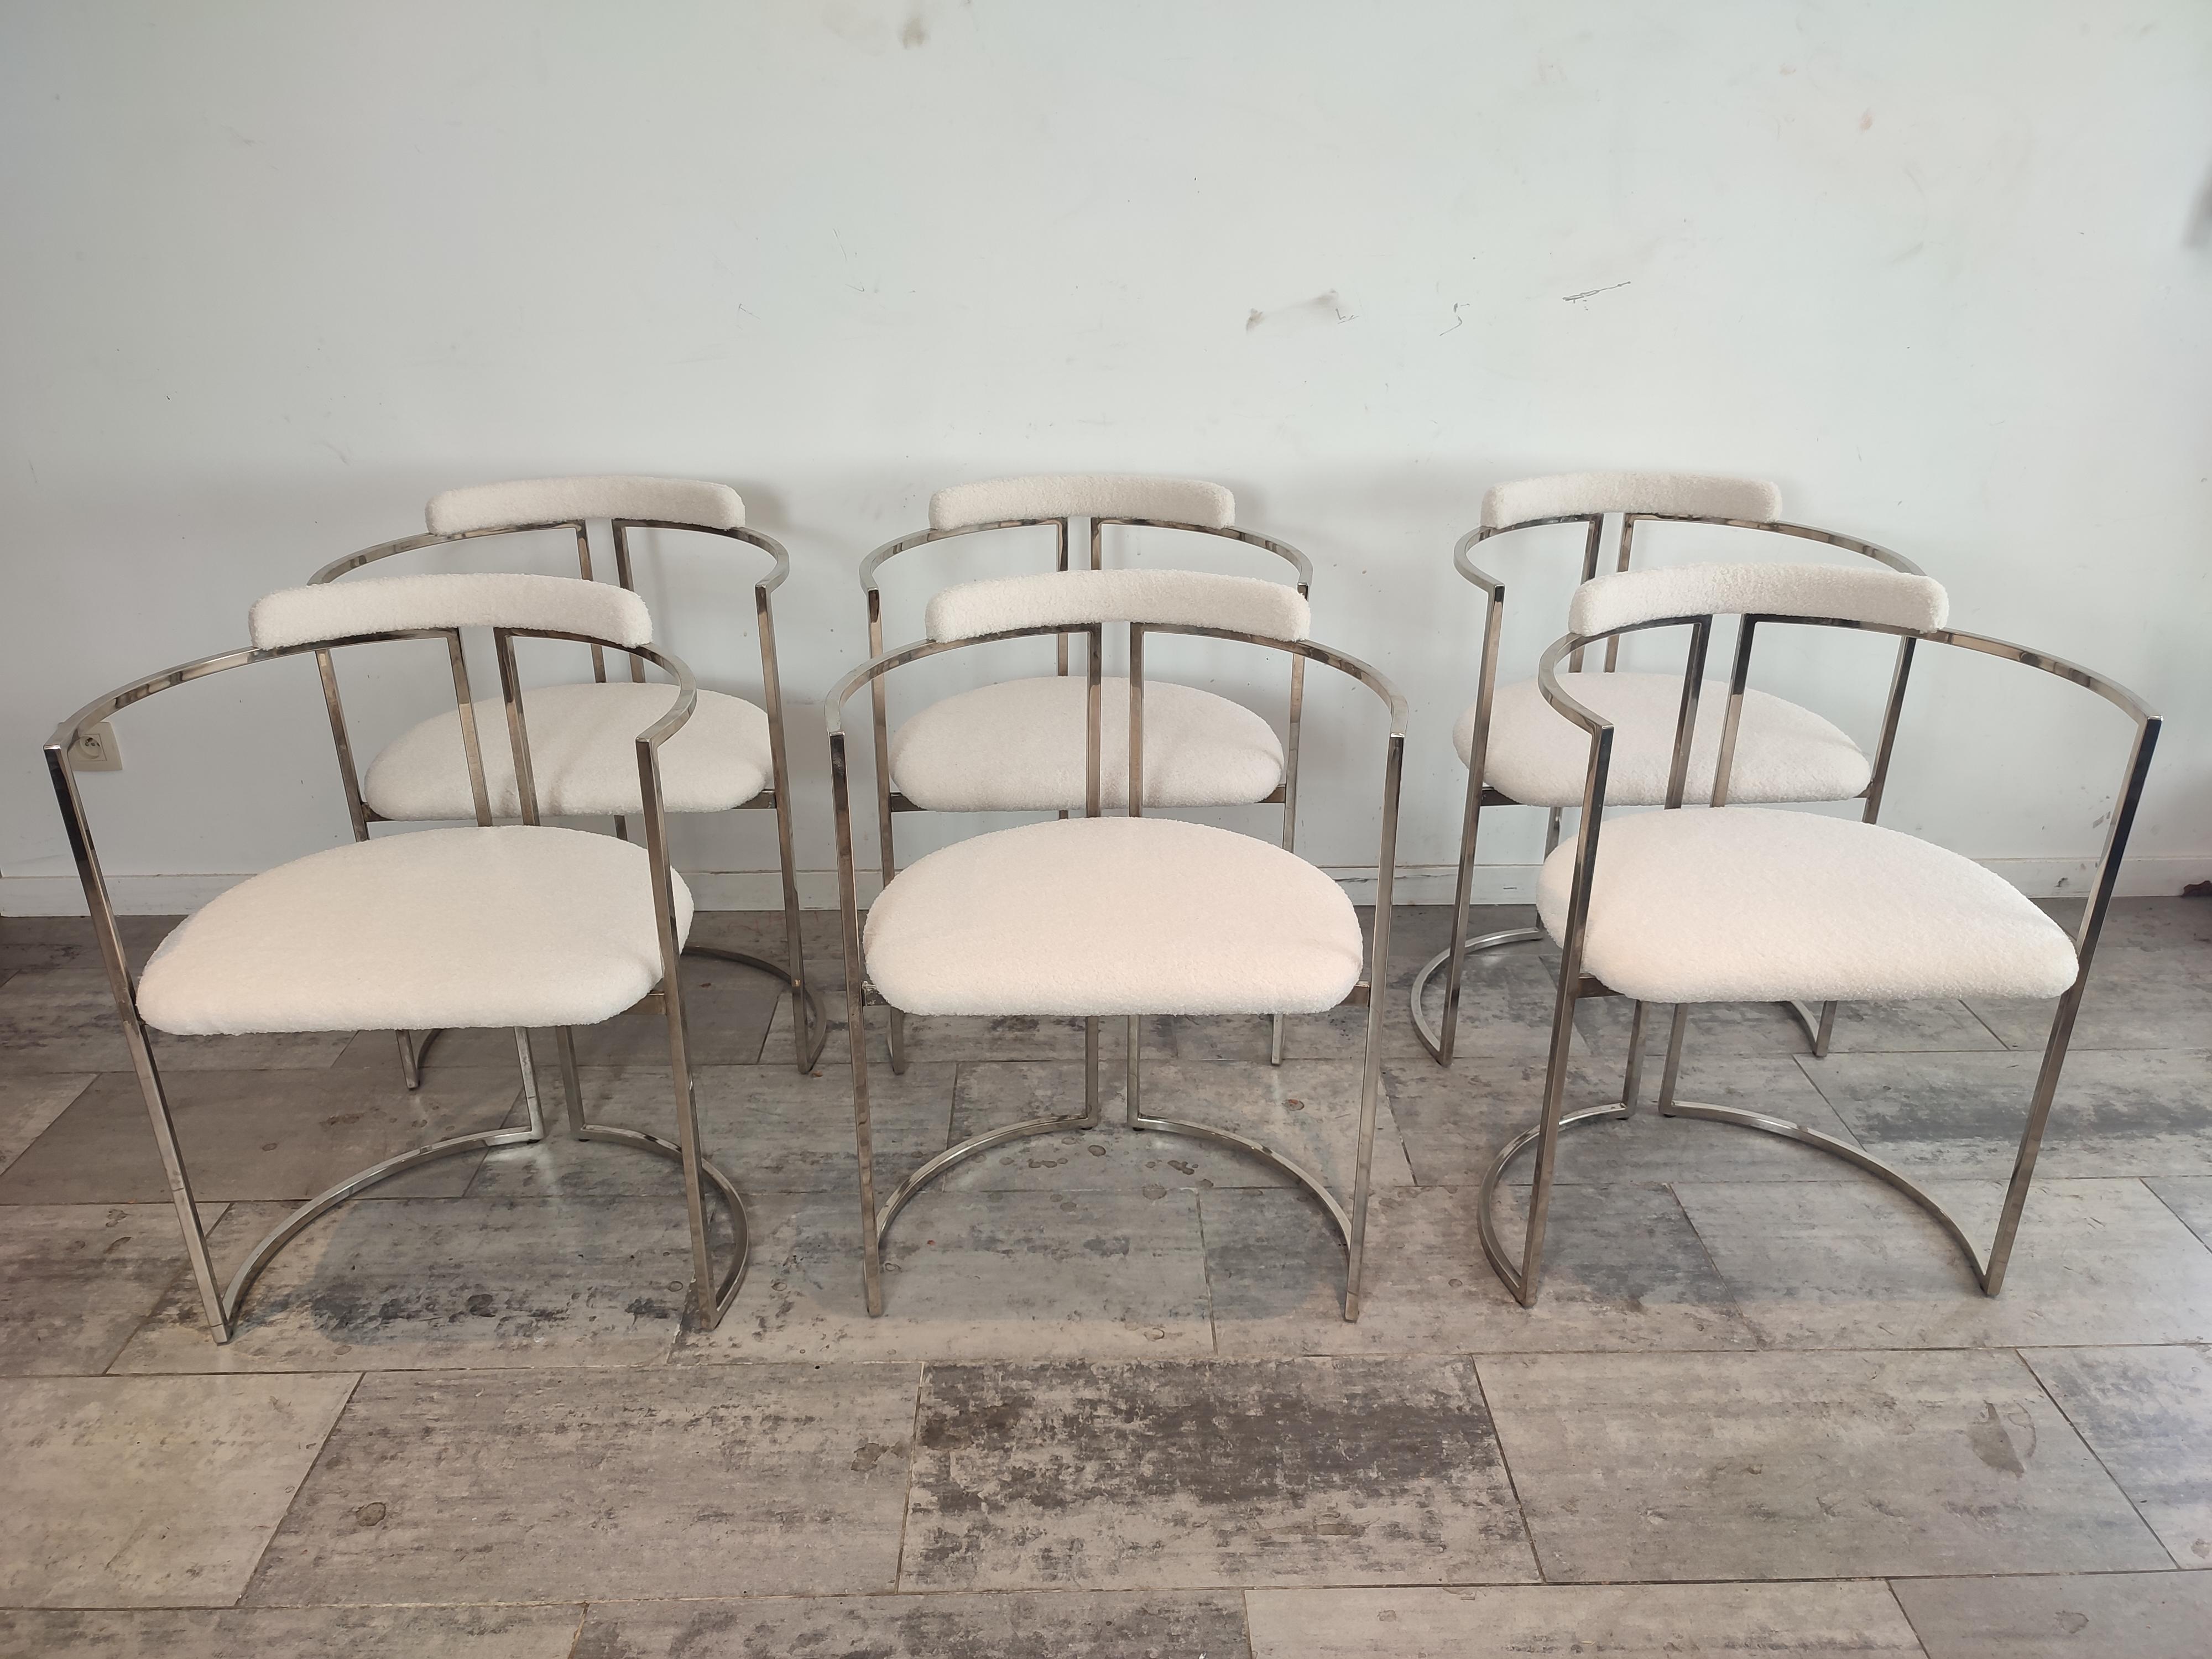 Polished Chromed chairs from Belgo chrome, reupholstered.